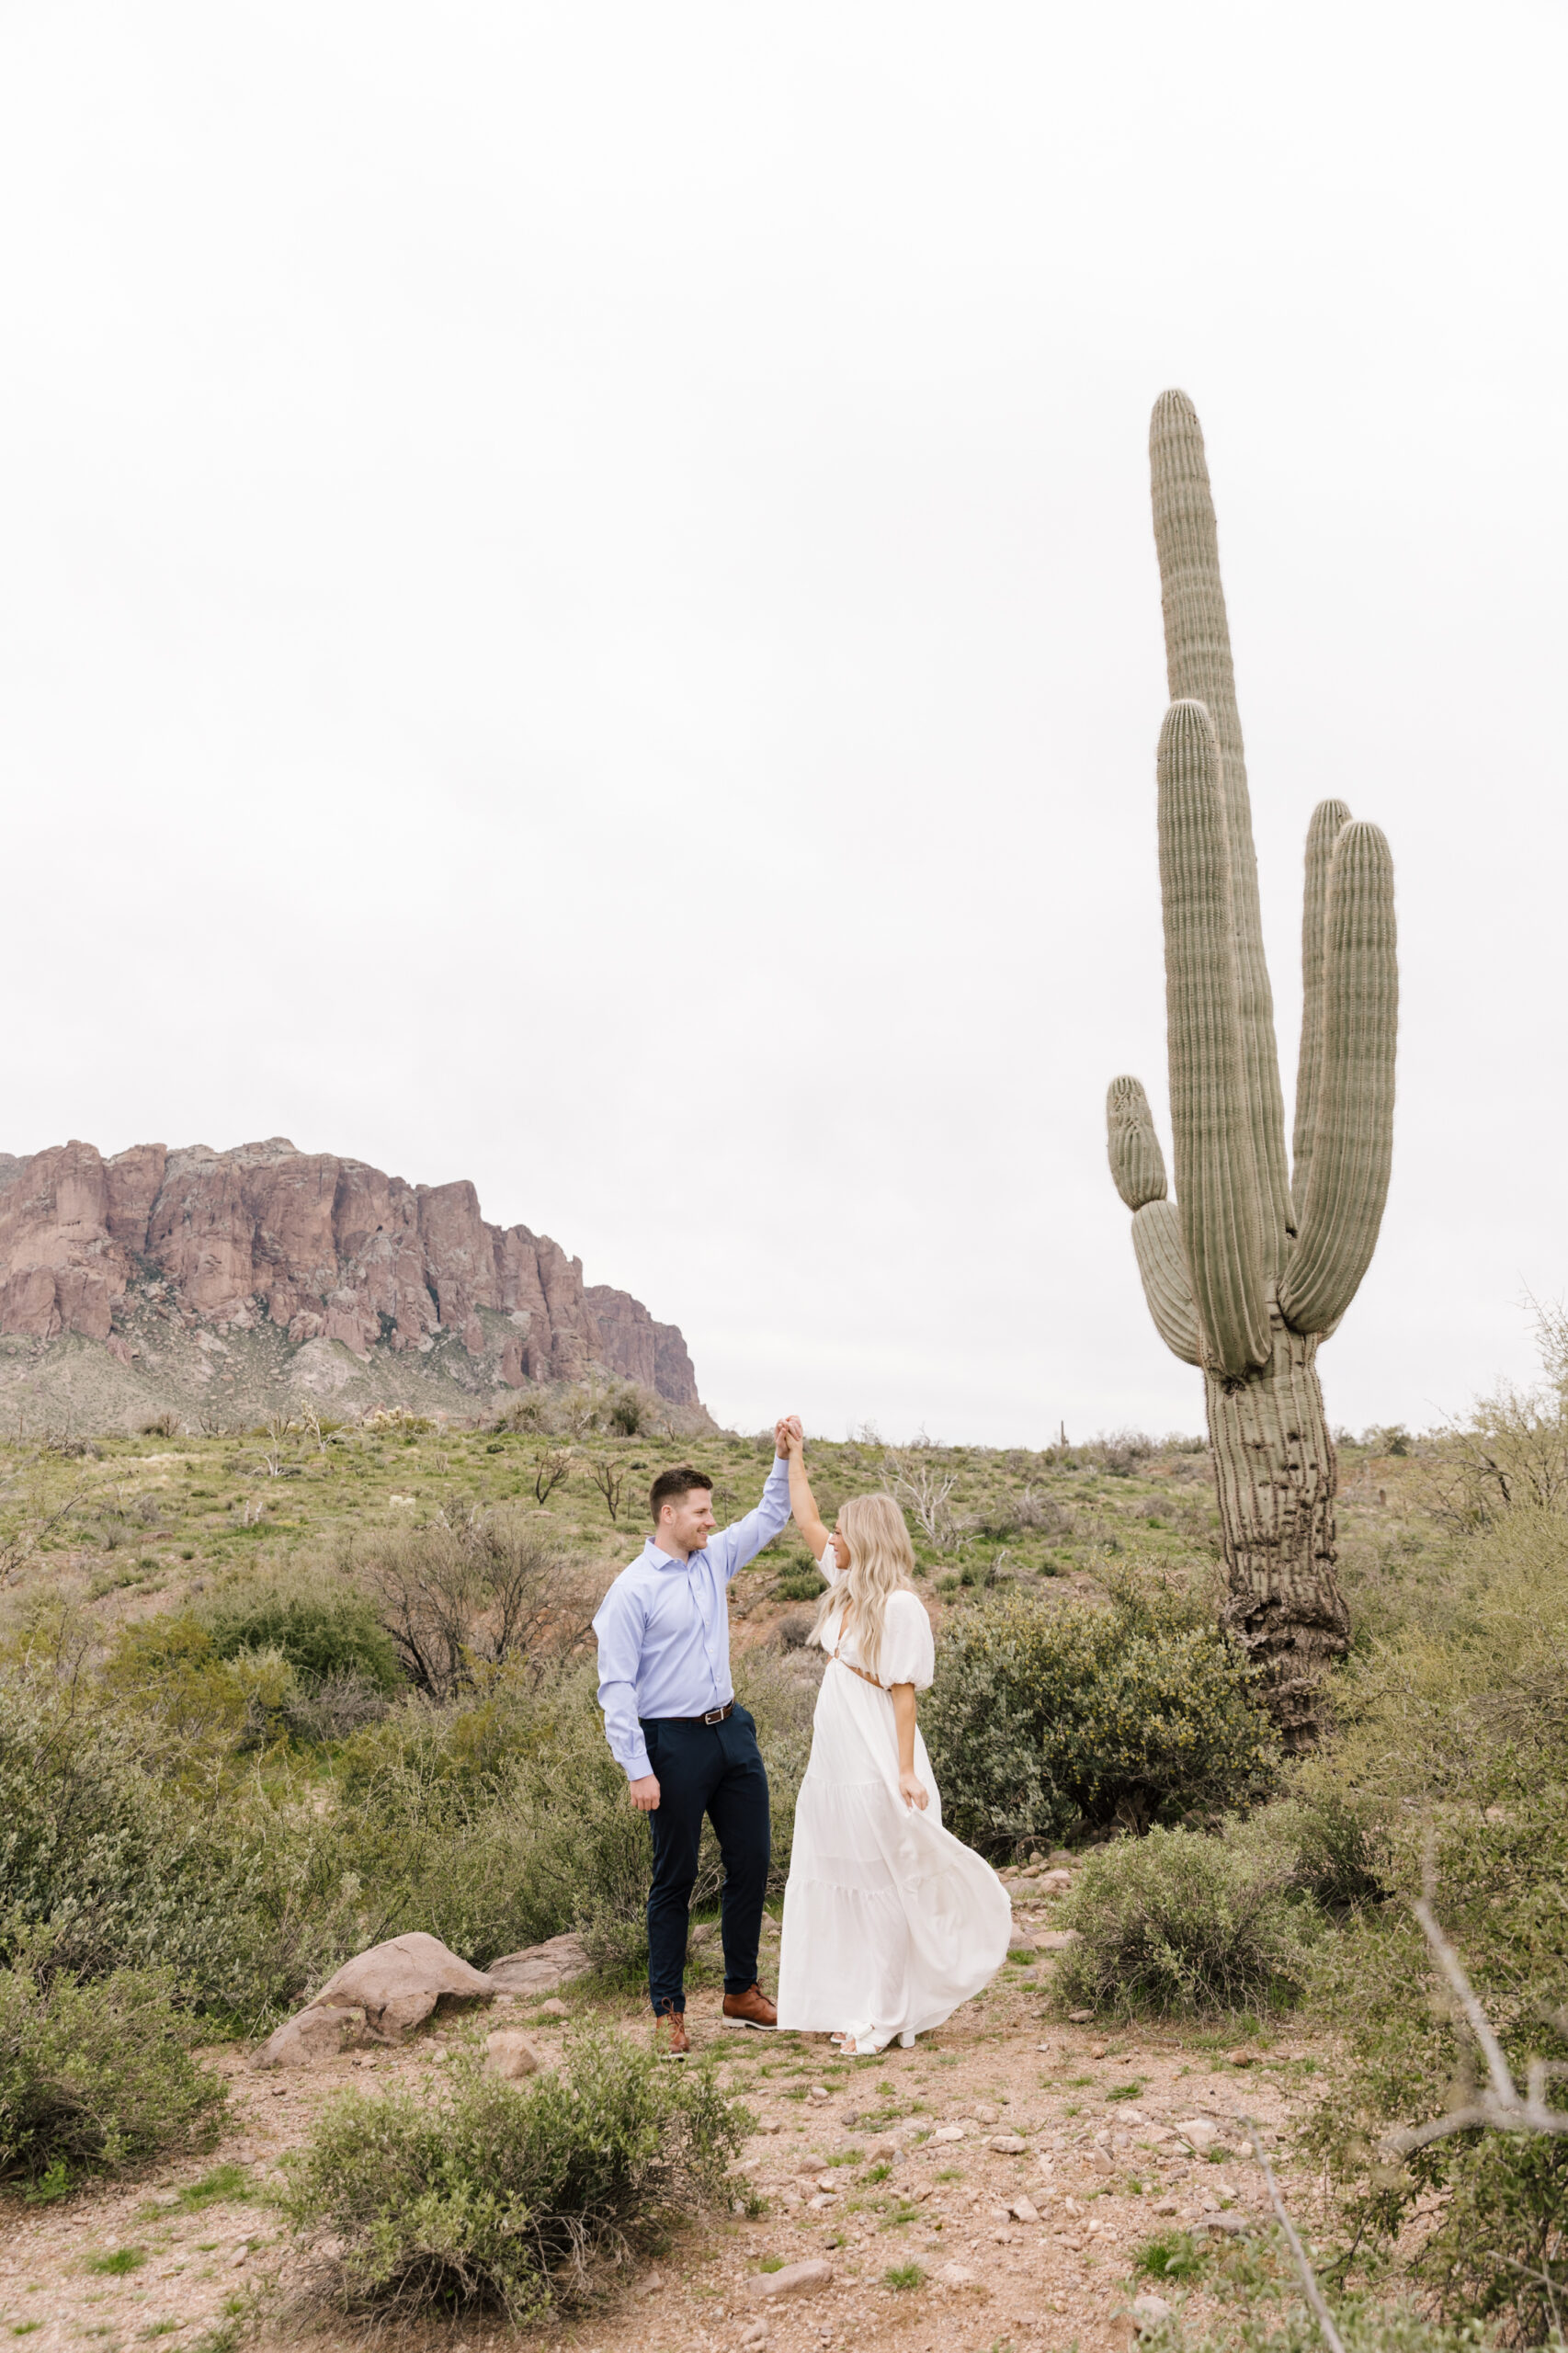 Guy twirling is fiance wearing a white dress in front of a tall Saguaro cactus at Lost Dutchman State Parl